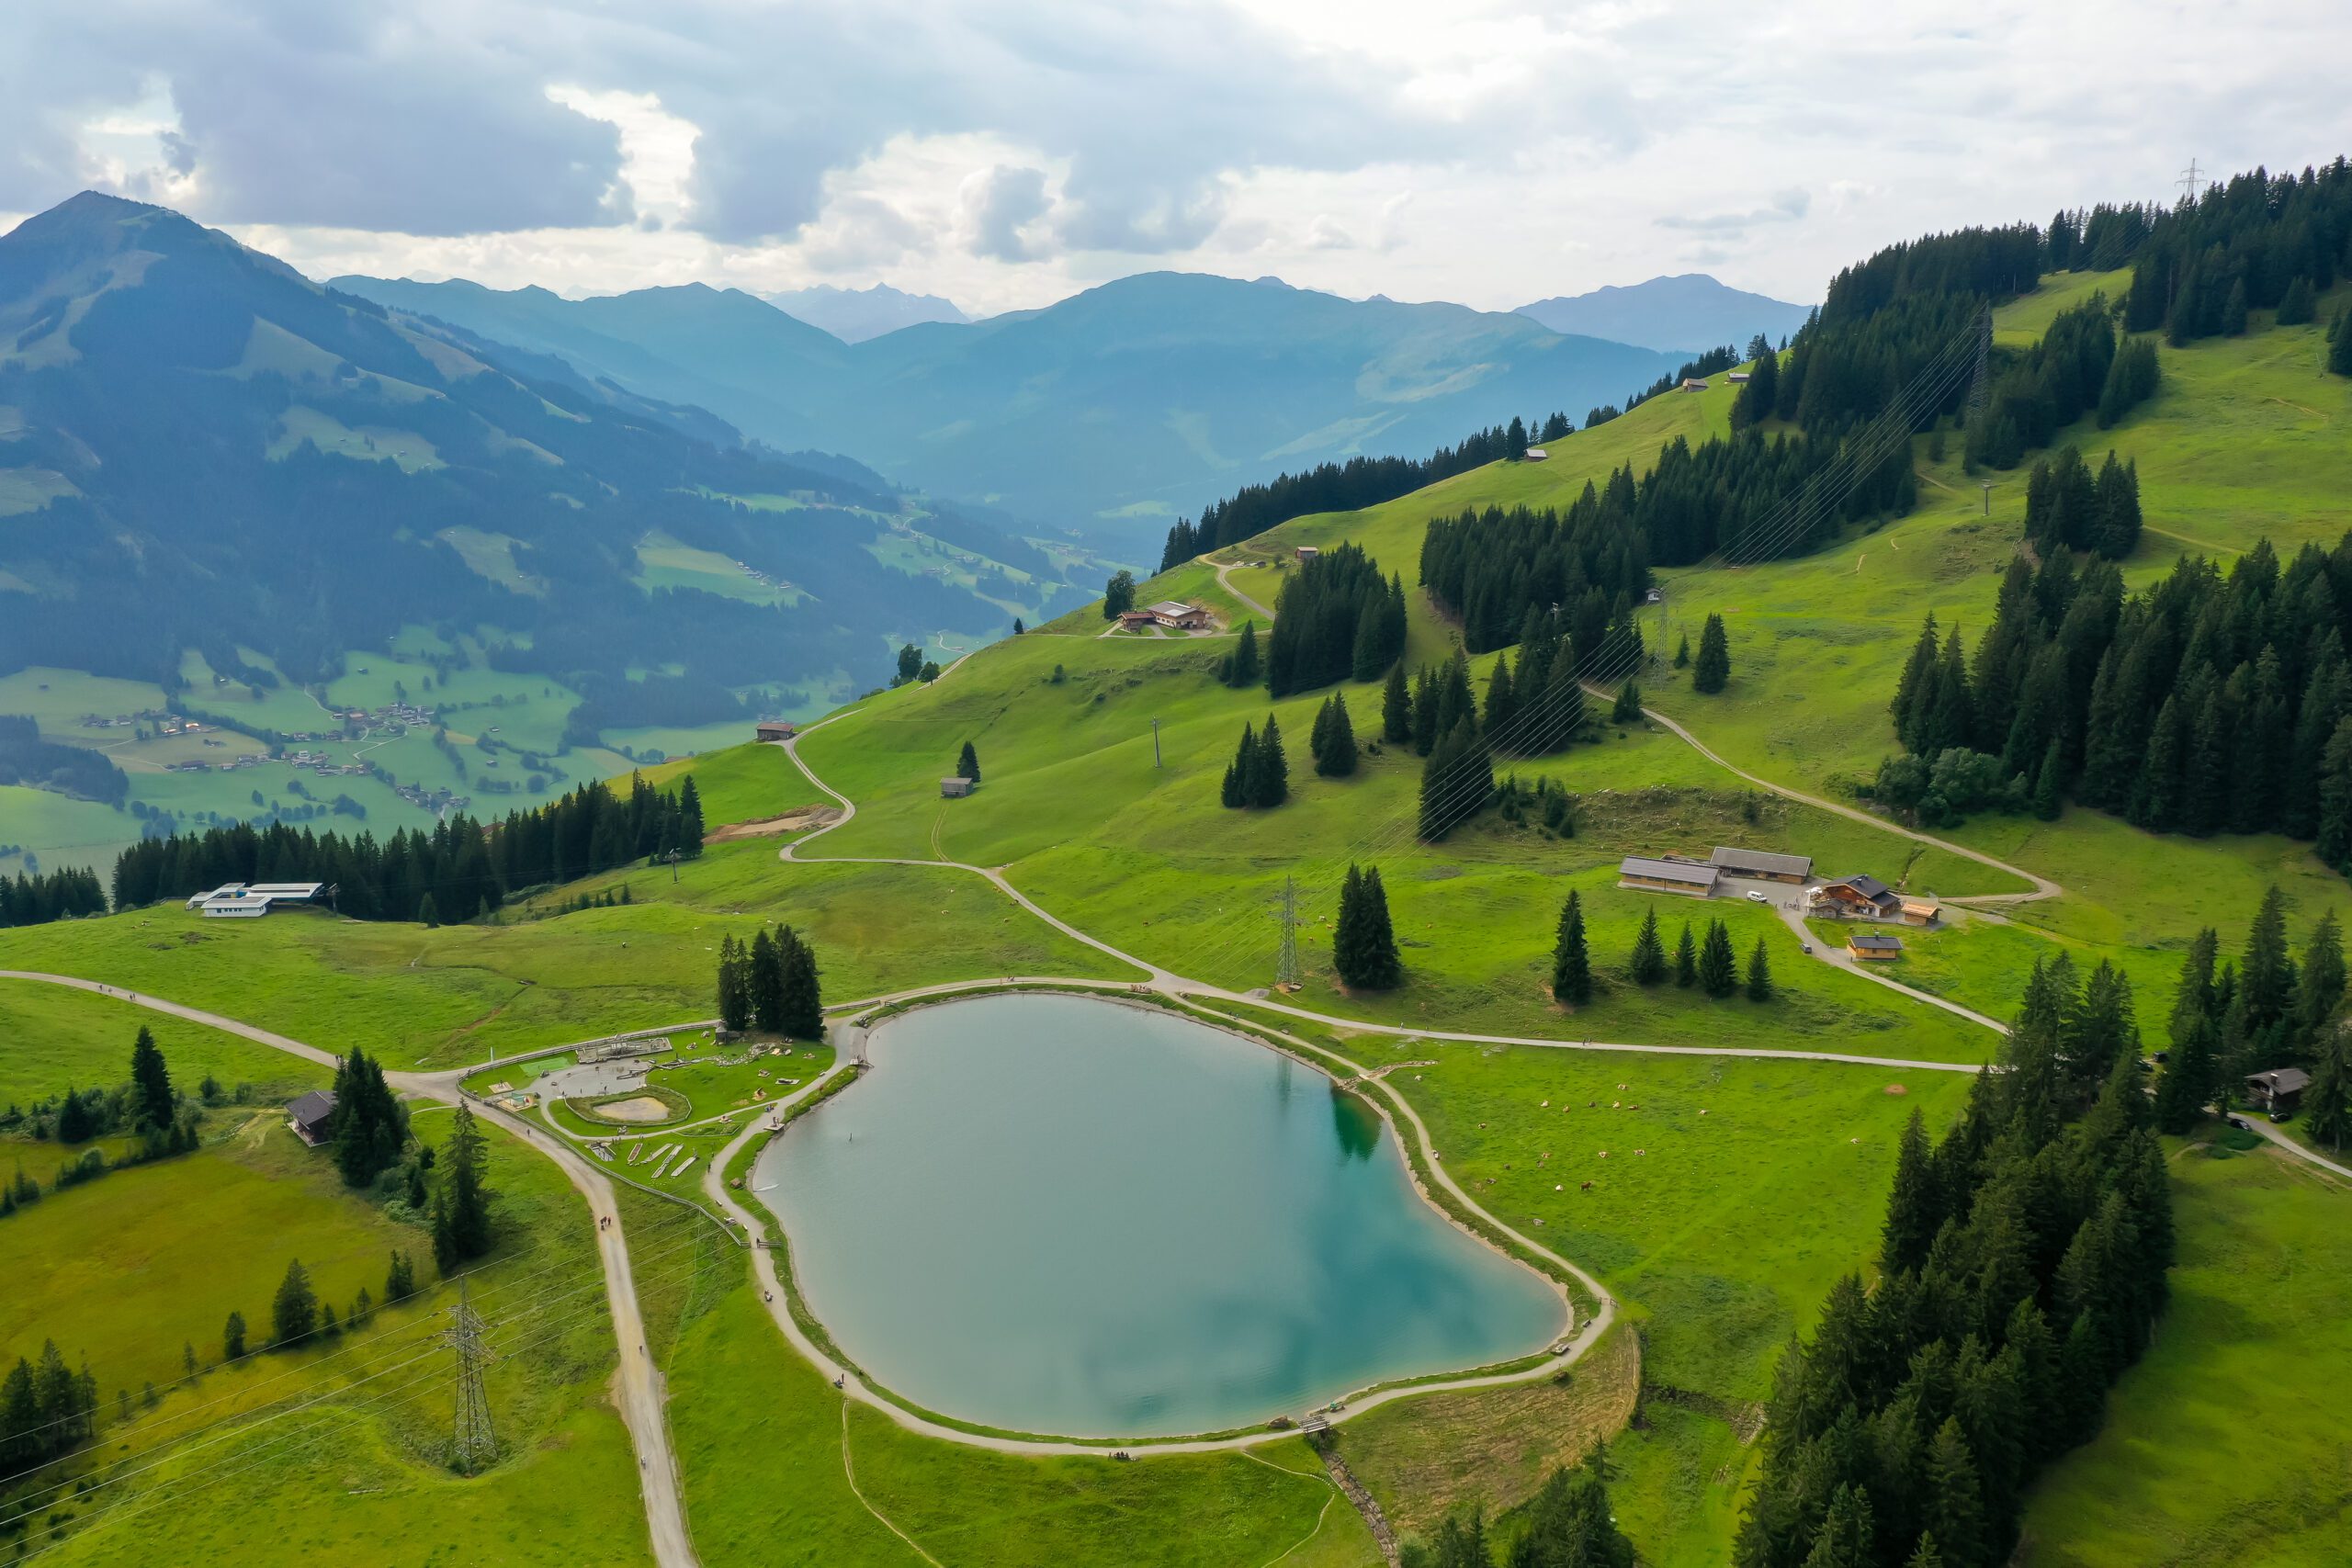 Landscape of the Filzalmsee surrounded by hills covered in greenery in Austria